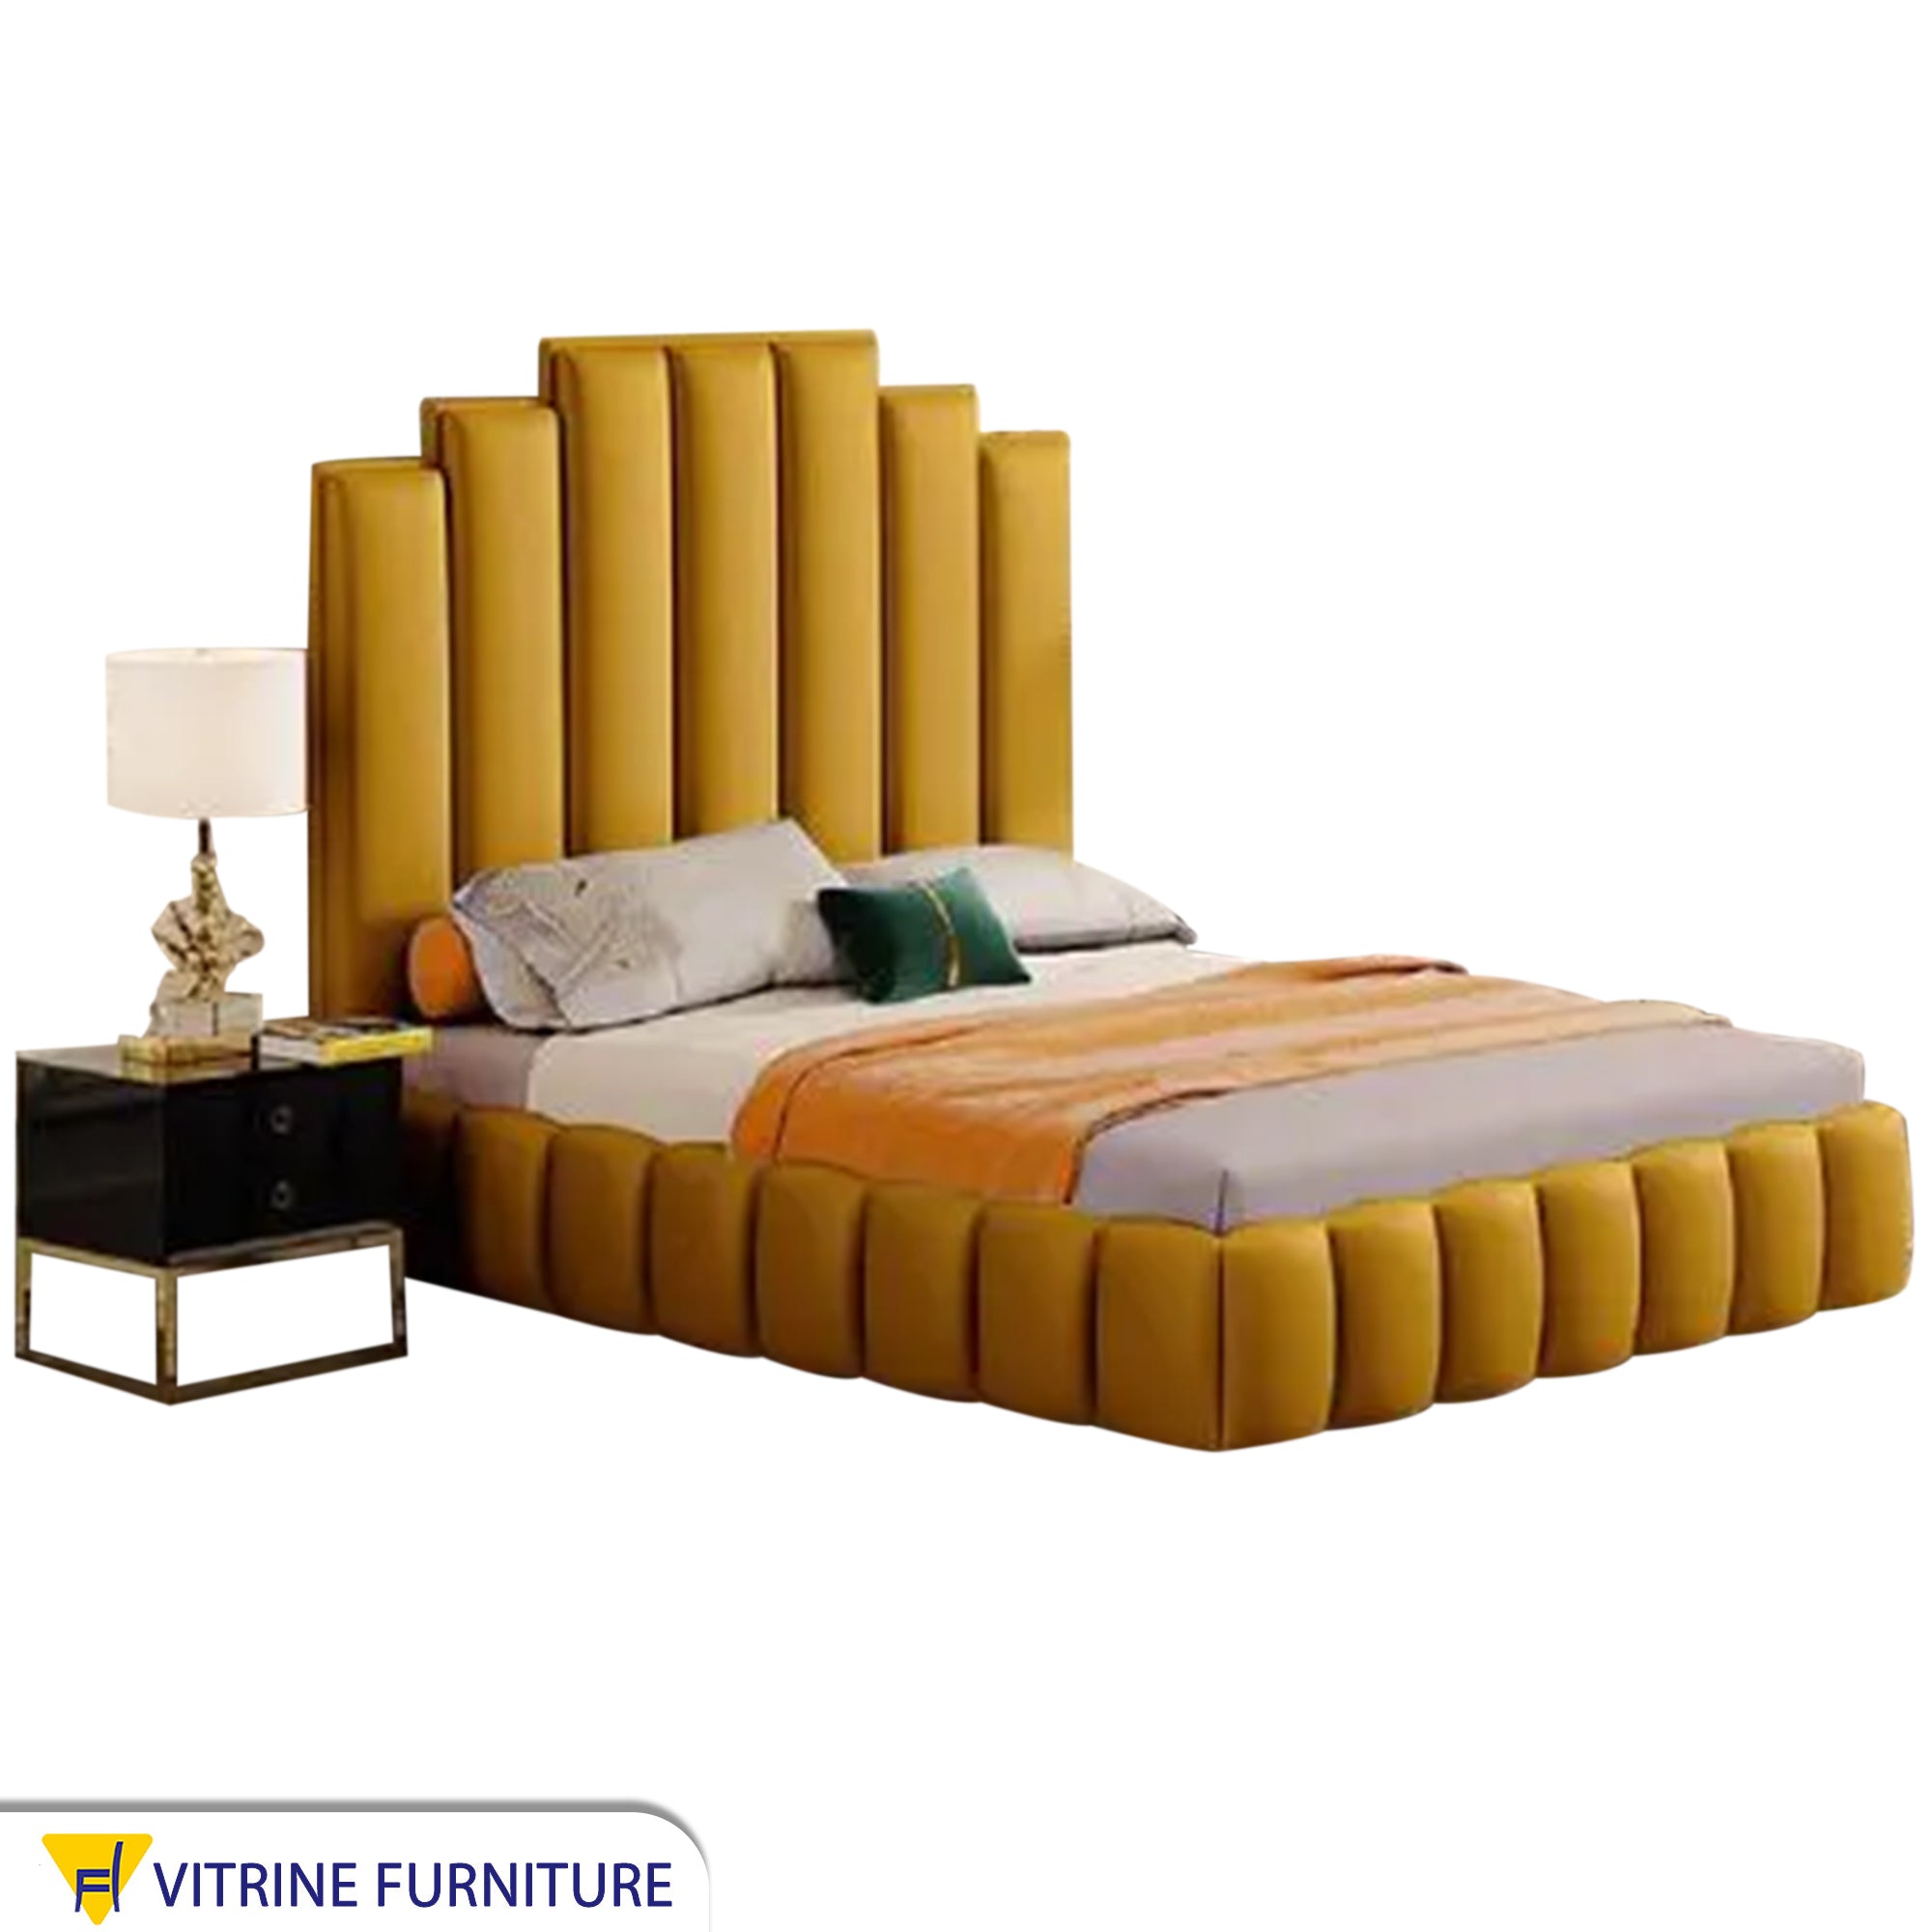 Yellow bed with a unique back